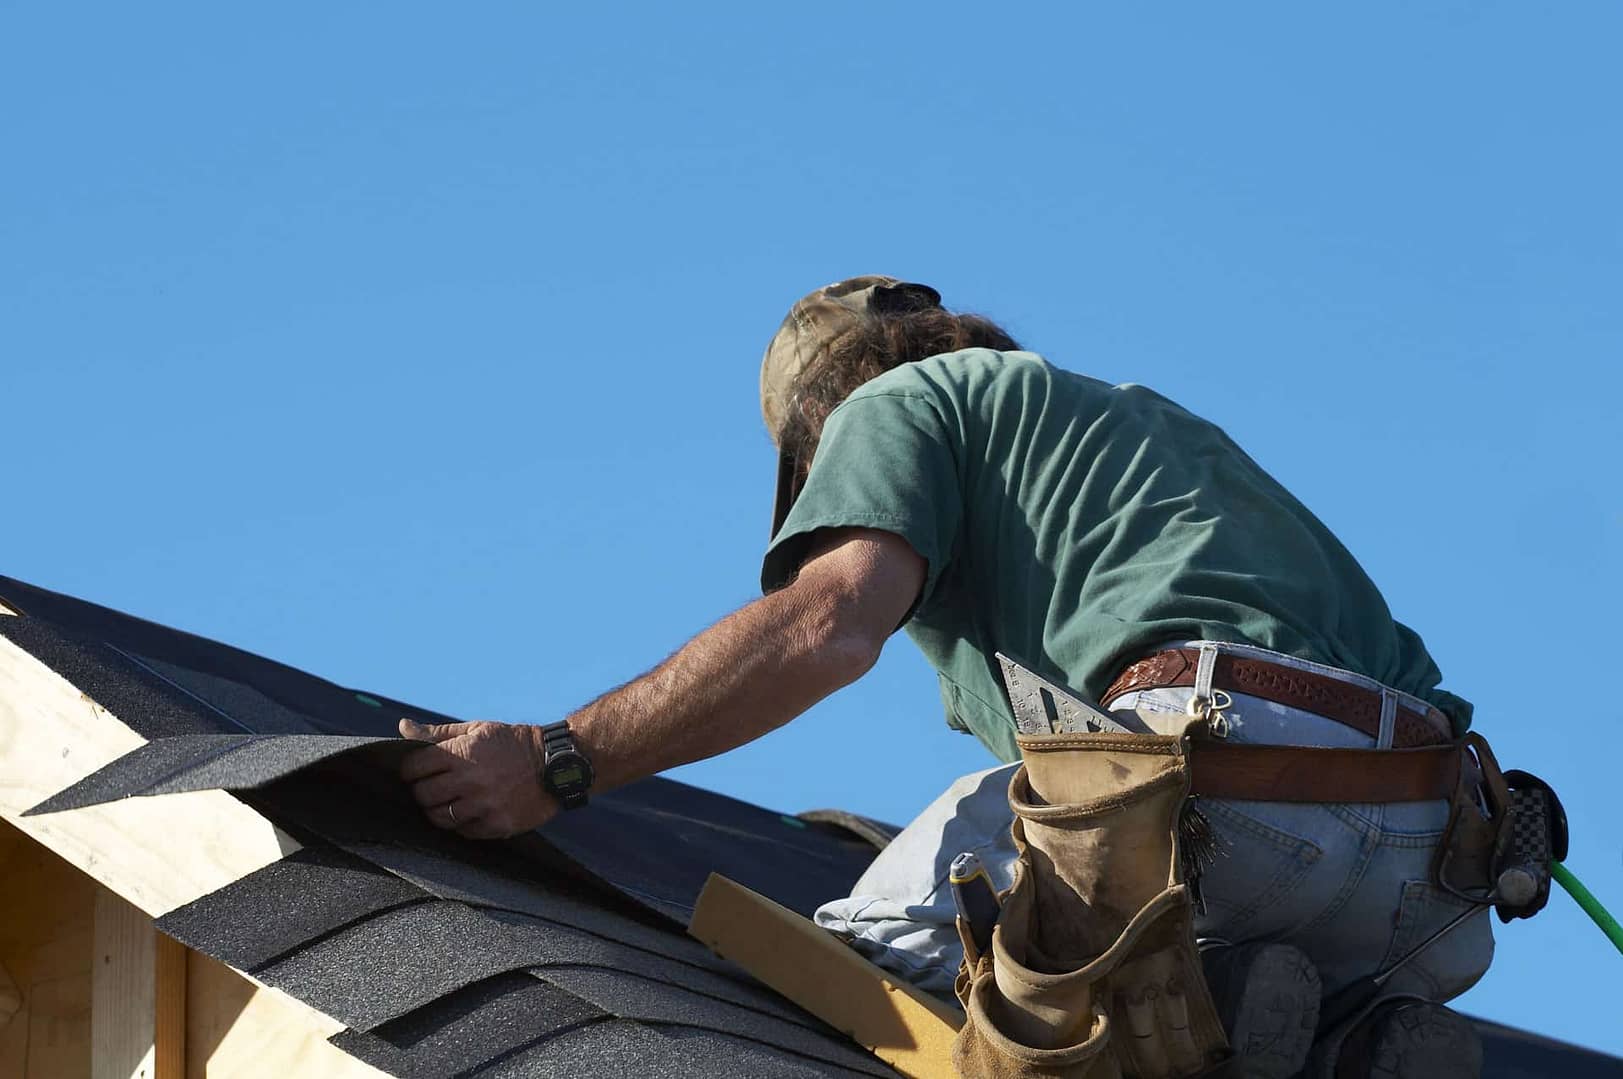 architectural shingles are a great way to extend the life of your roof